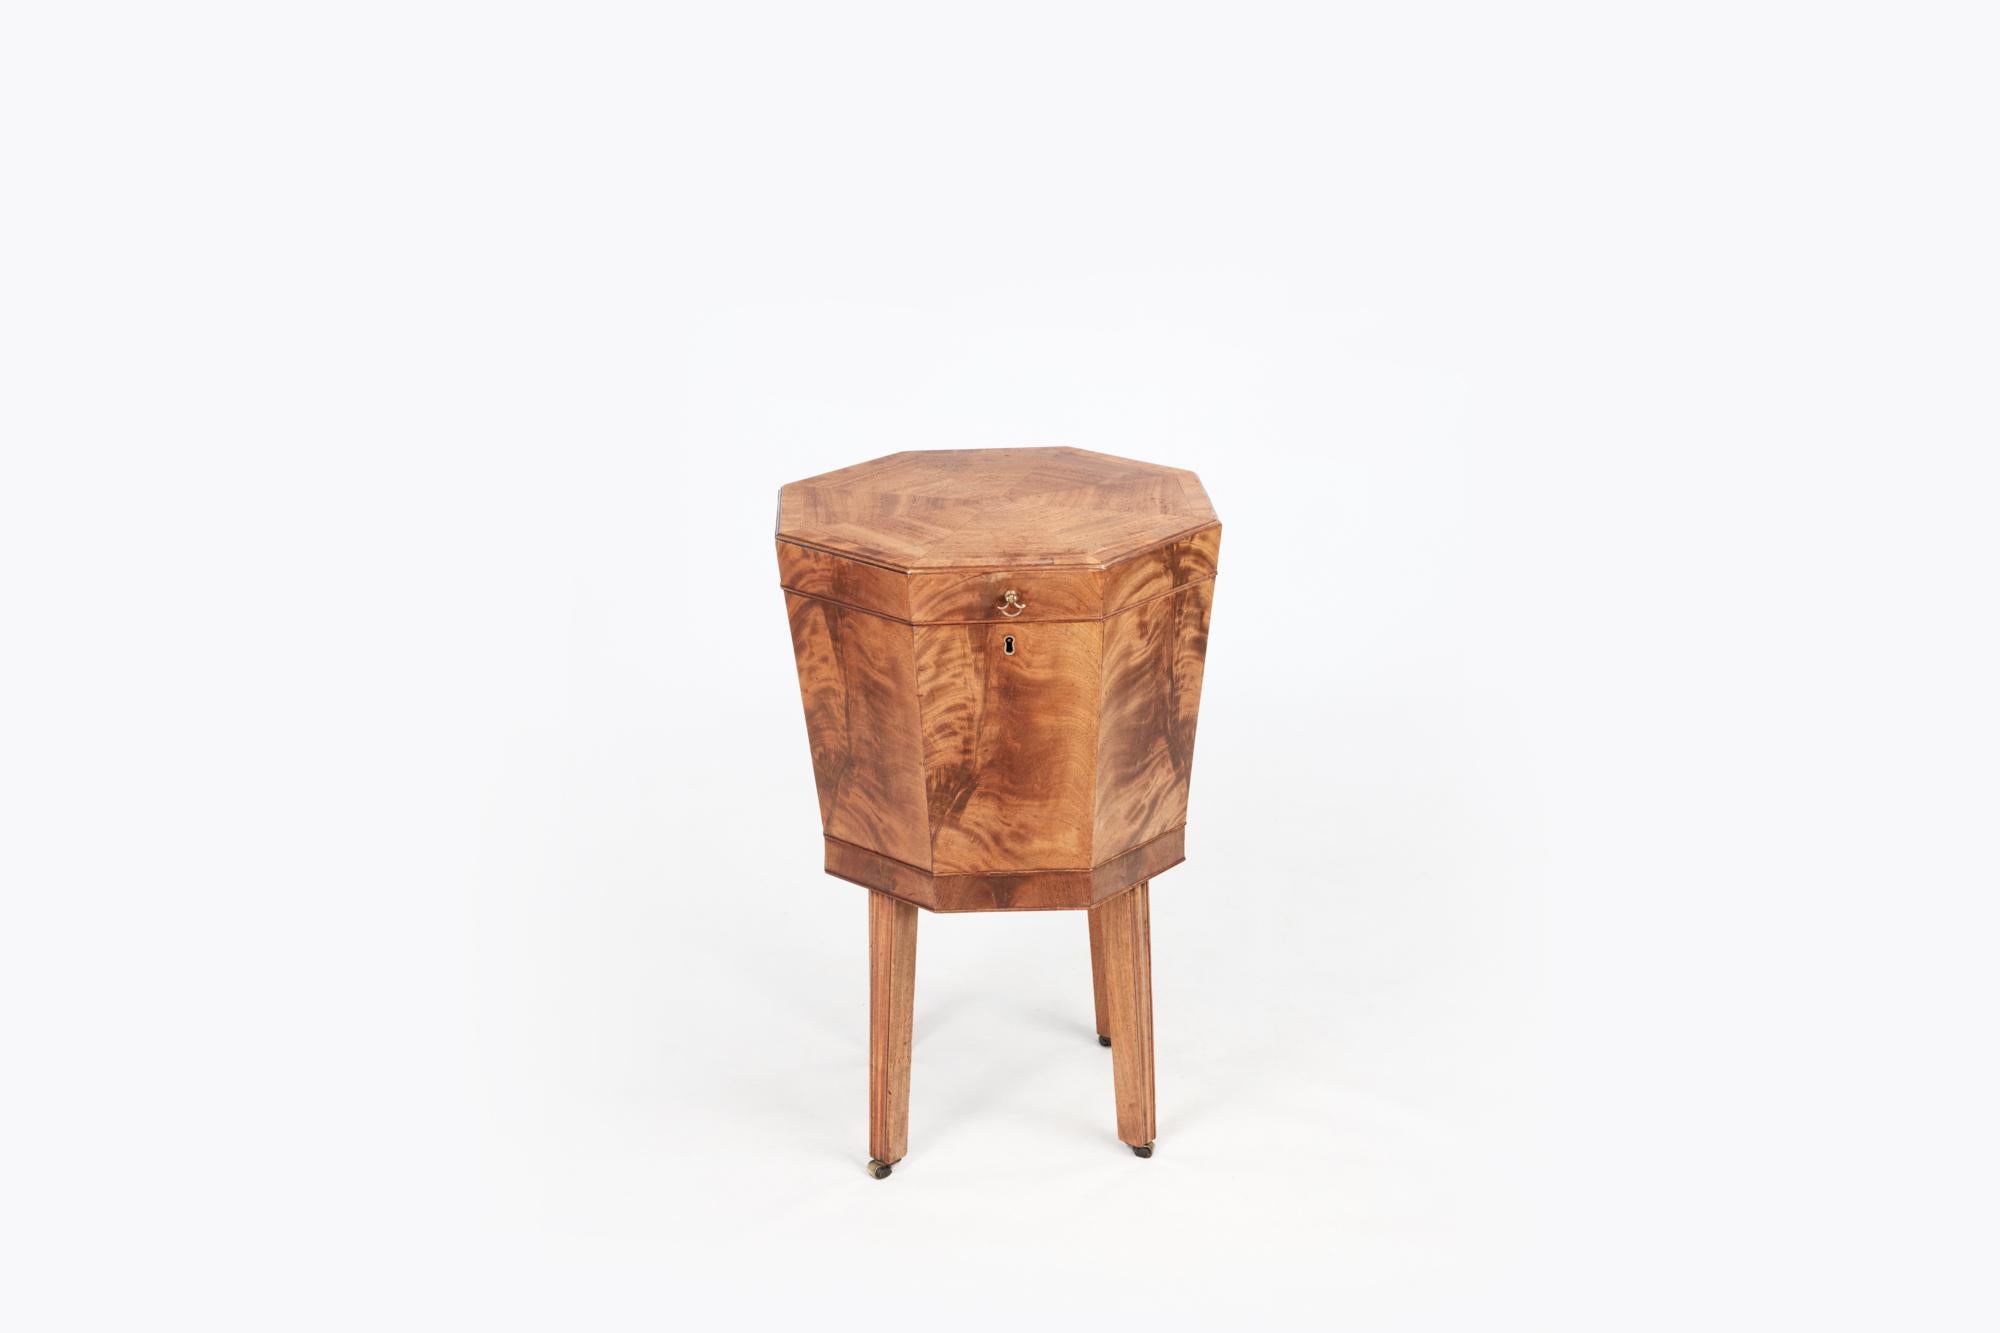 19th Century George III Mahogany octagonal cellarette. The tapering body with simple moldings stands on four tapering square legs terminating on simple brass castors. The piece is complete with a lead-lined and fitted interior.